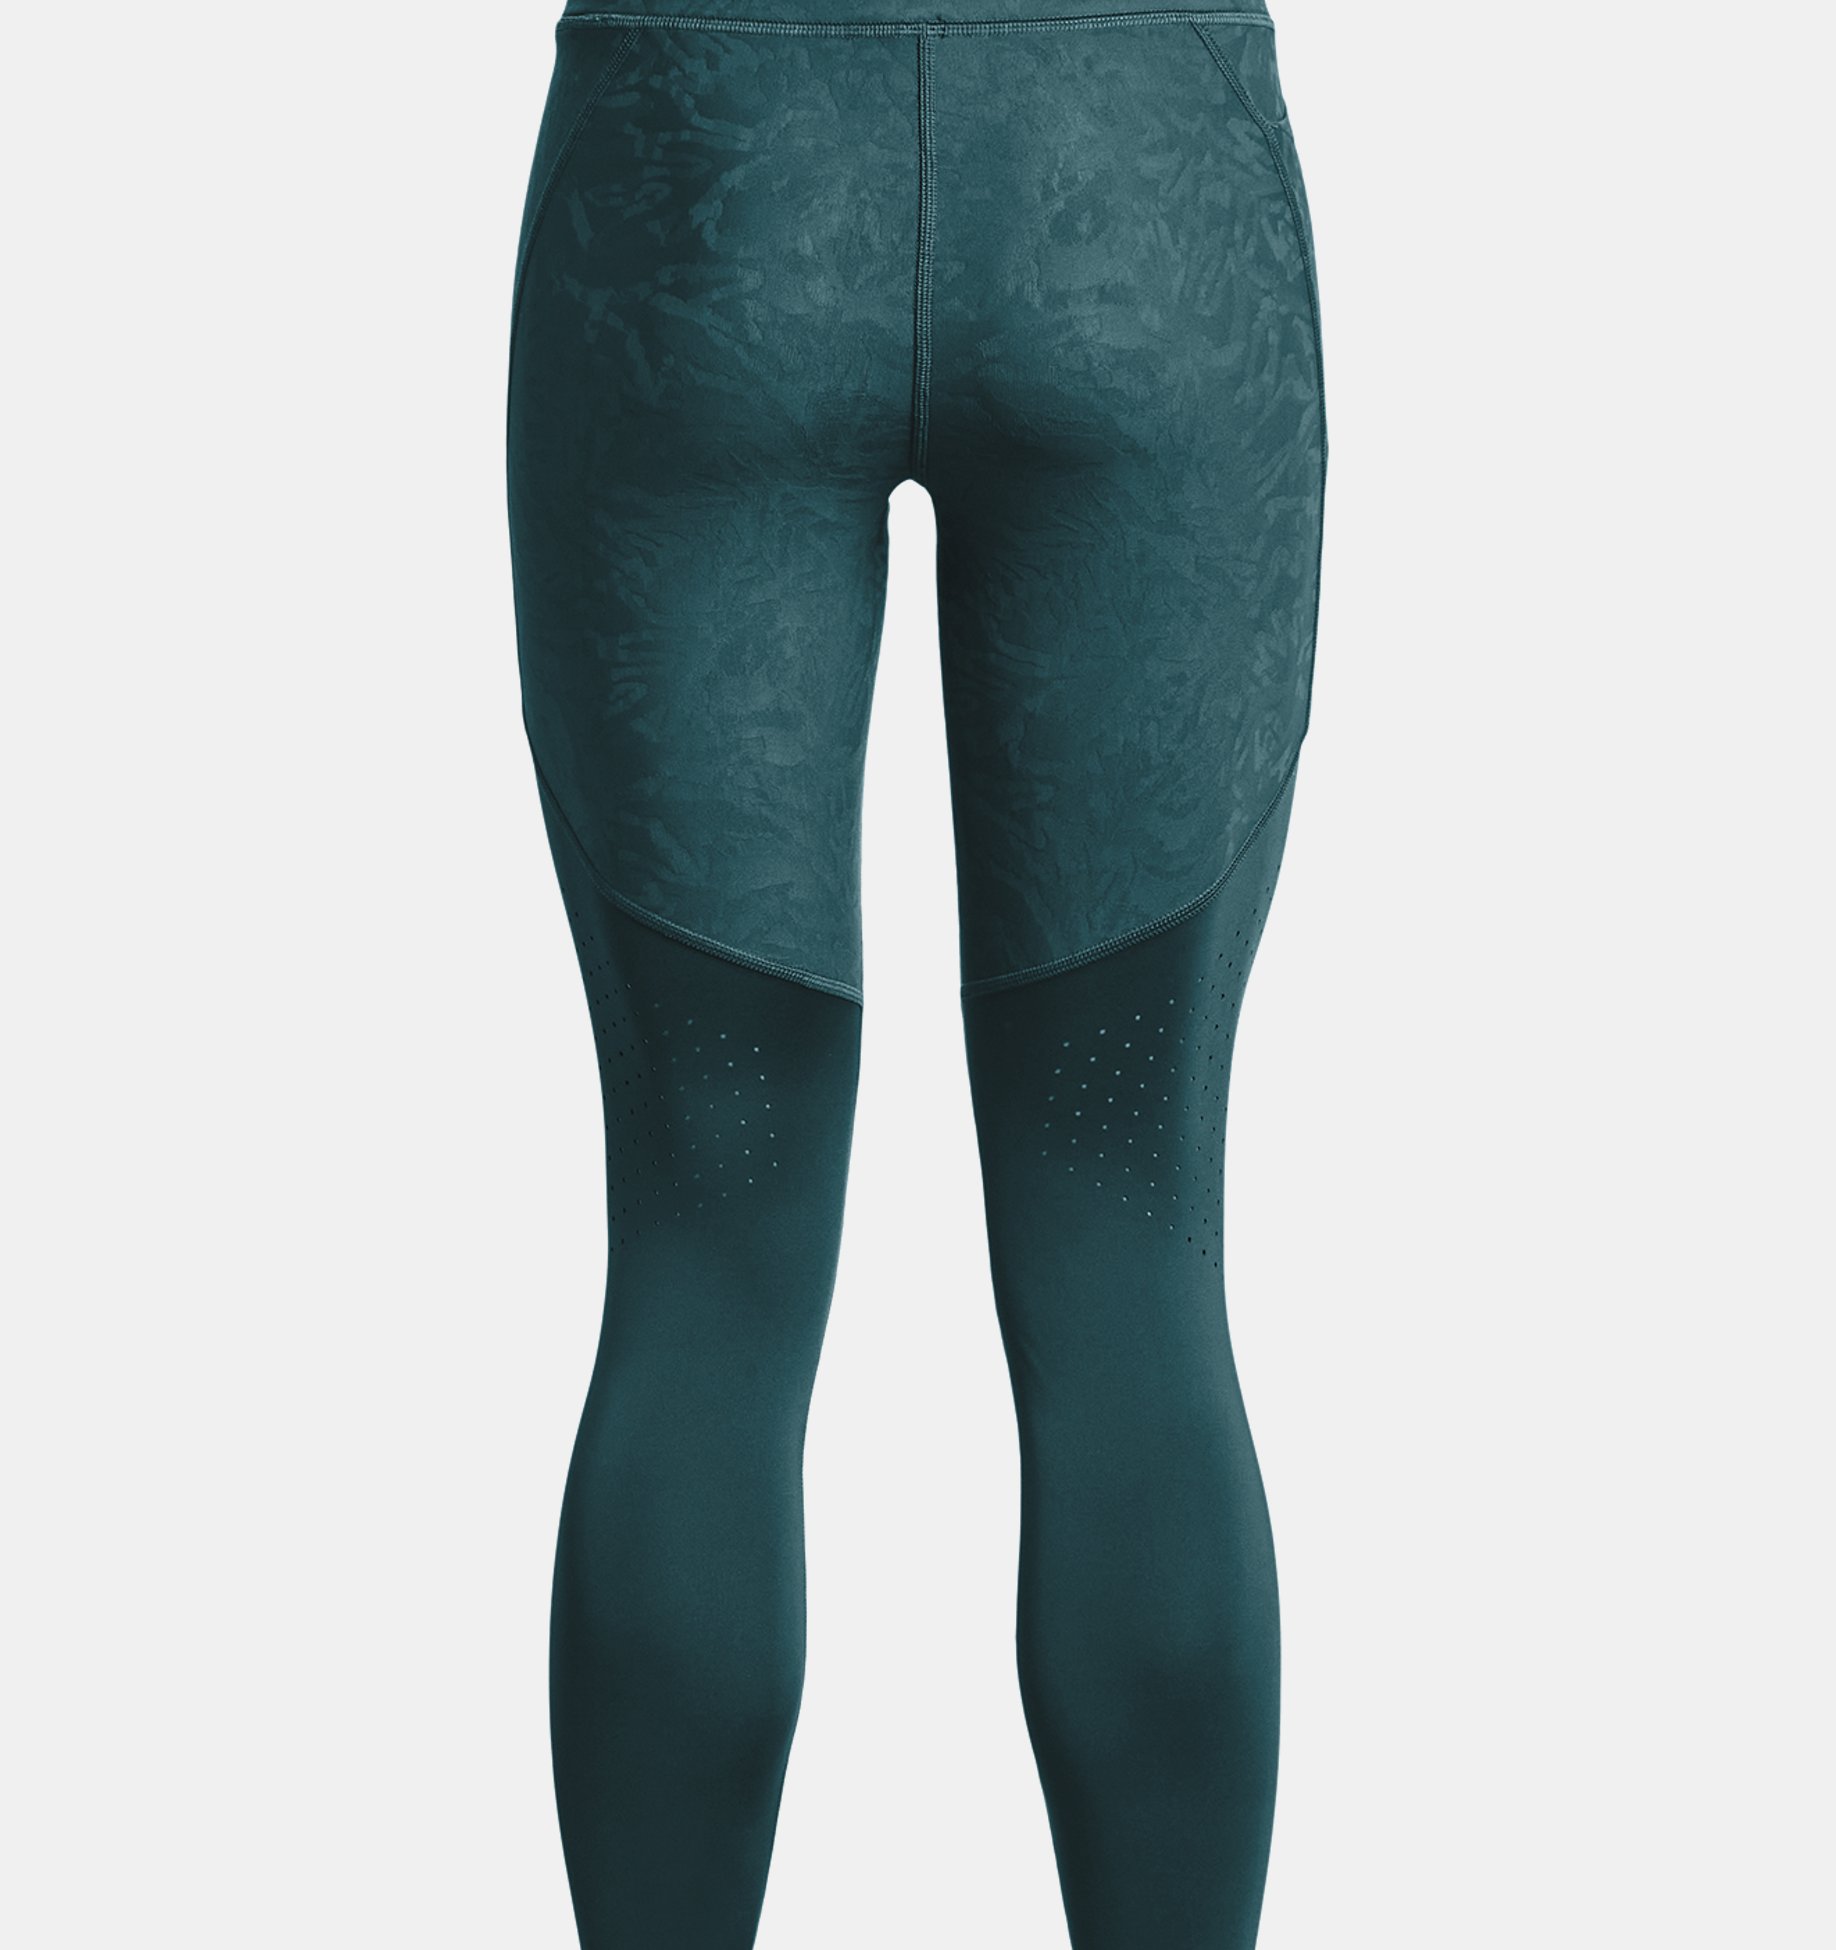 Fly Fast 3.0 Tights | Under